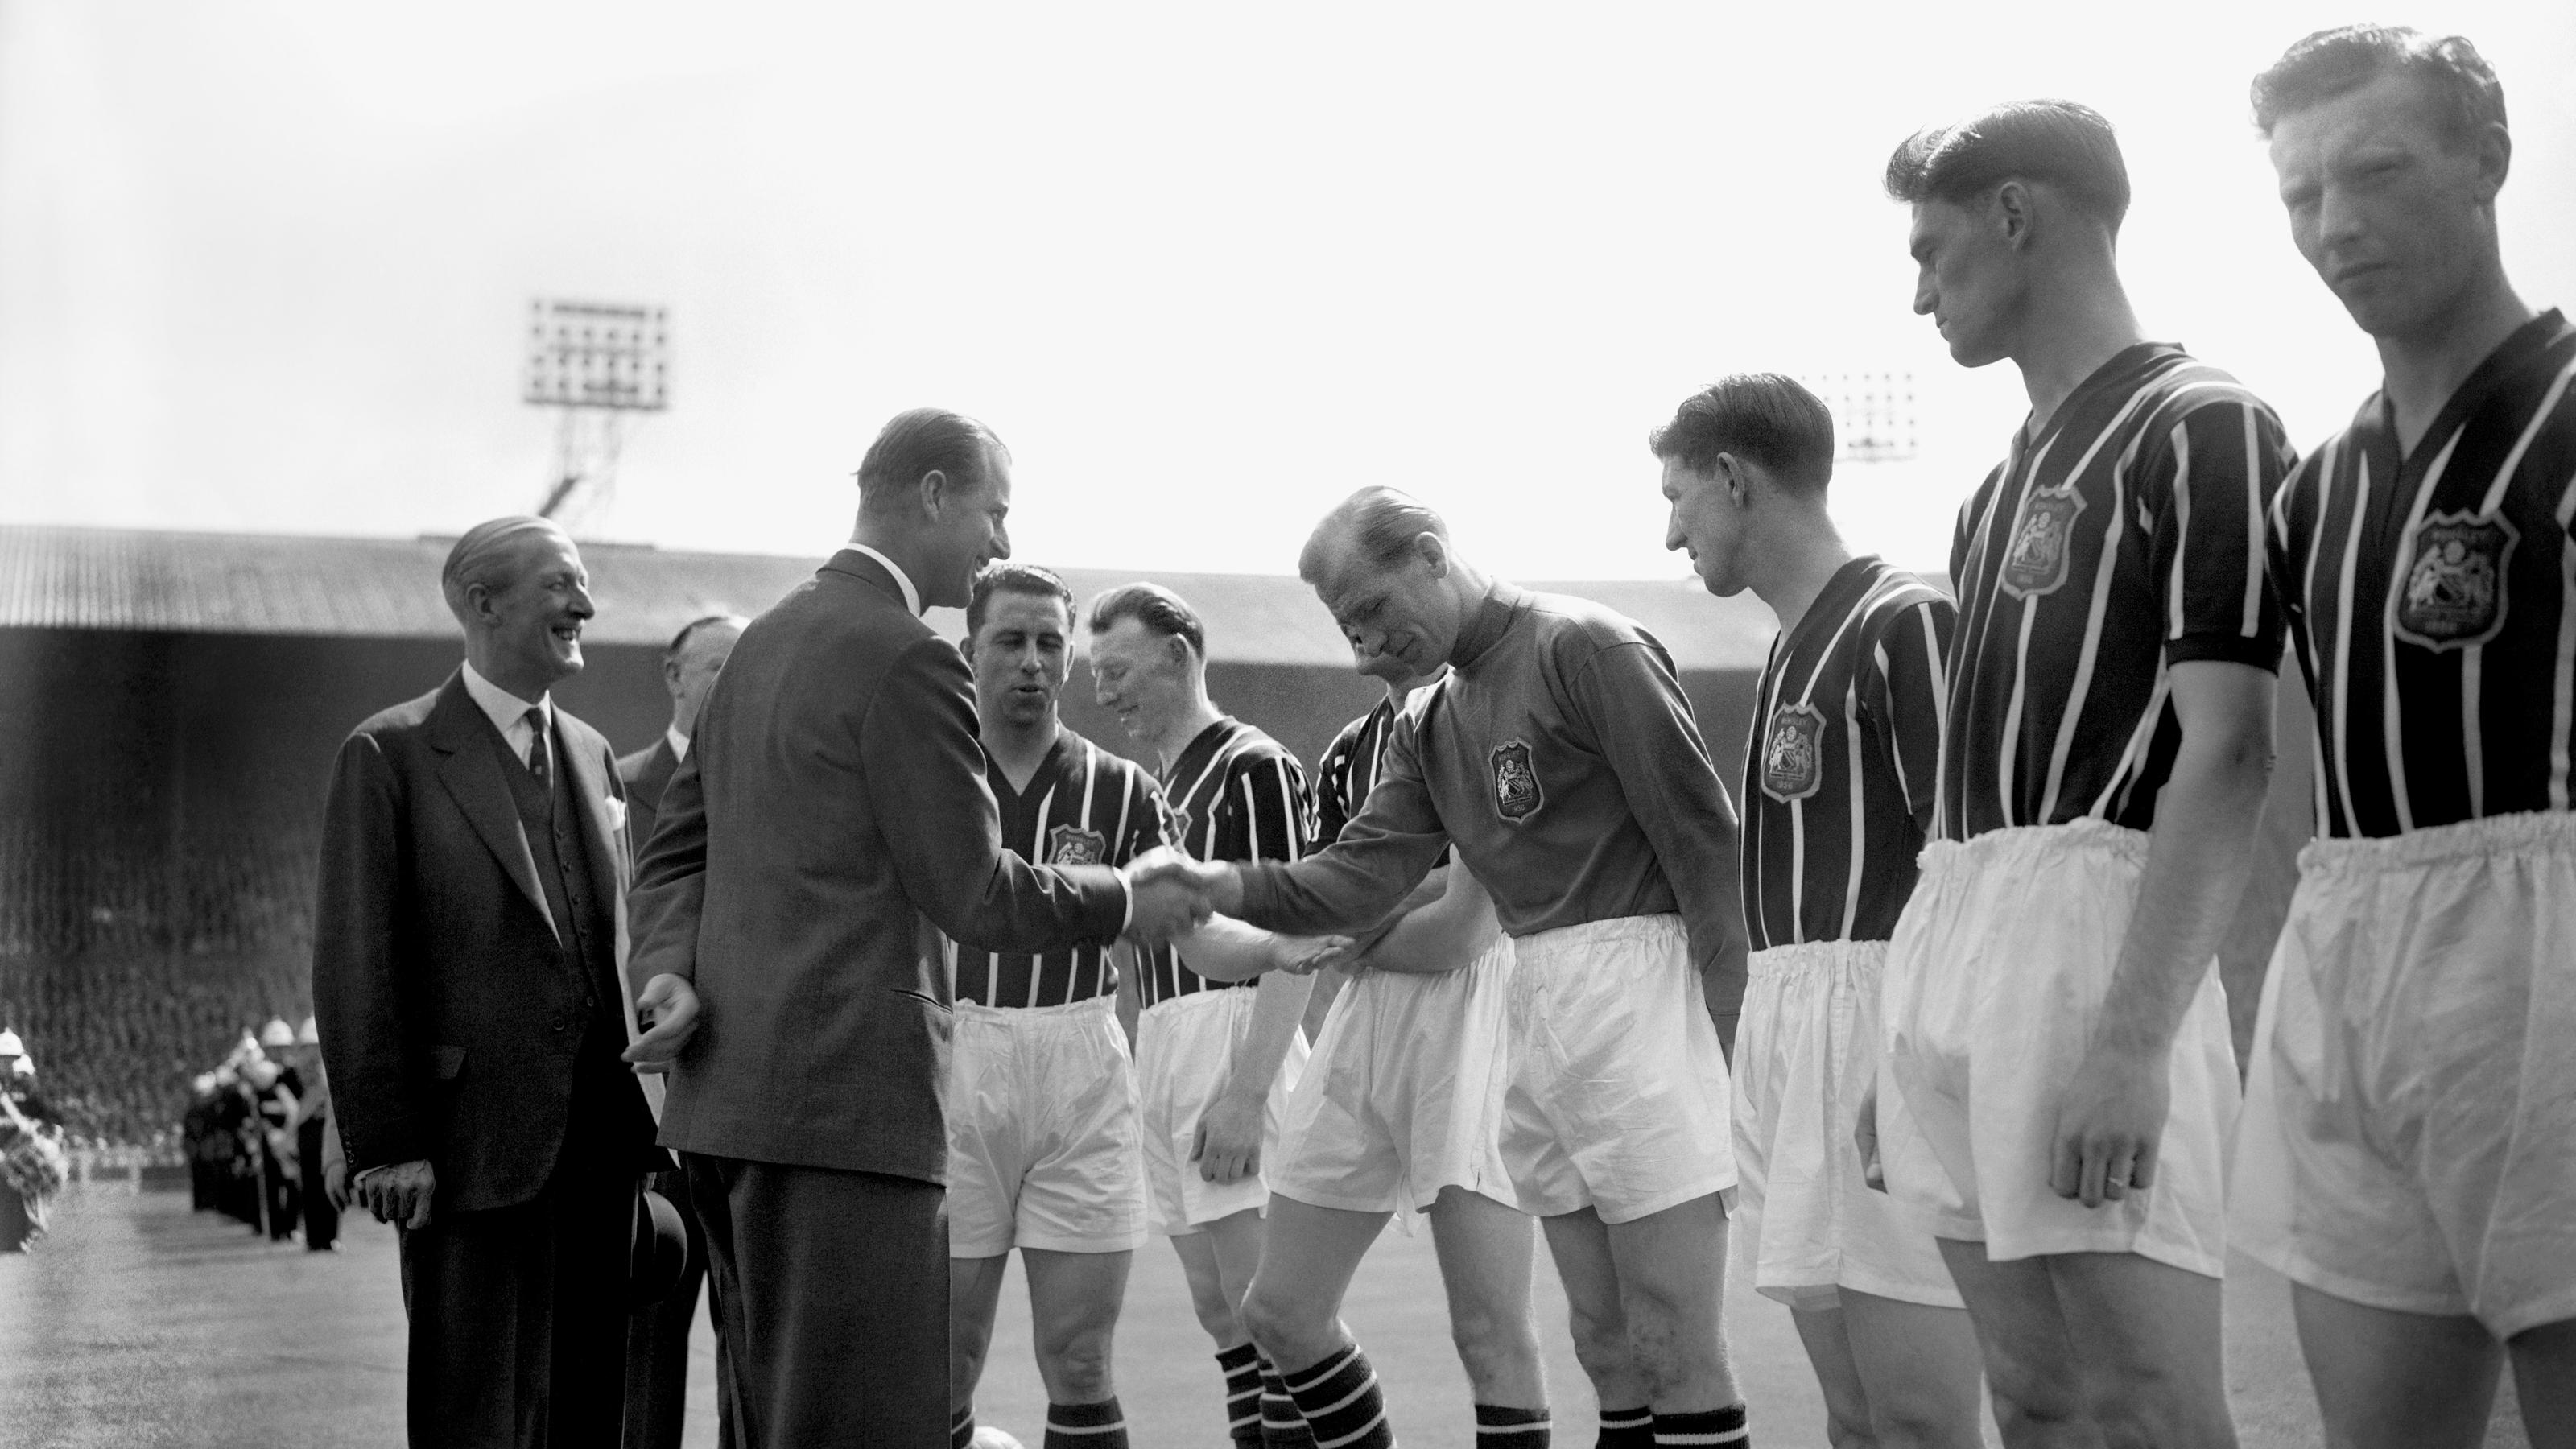 Duke of Edinburgh death. File photo dated 05/05/56 of The Duke of Edinburgh shaking hands with Manchester City's Footballer of the Year Bert Trautmann, before the FA Cup final at Wembley in London.